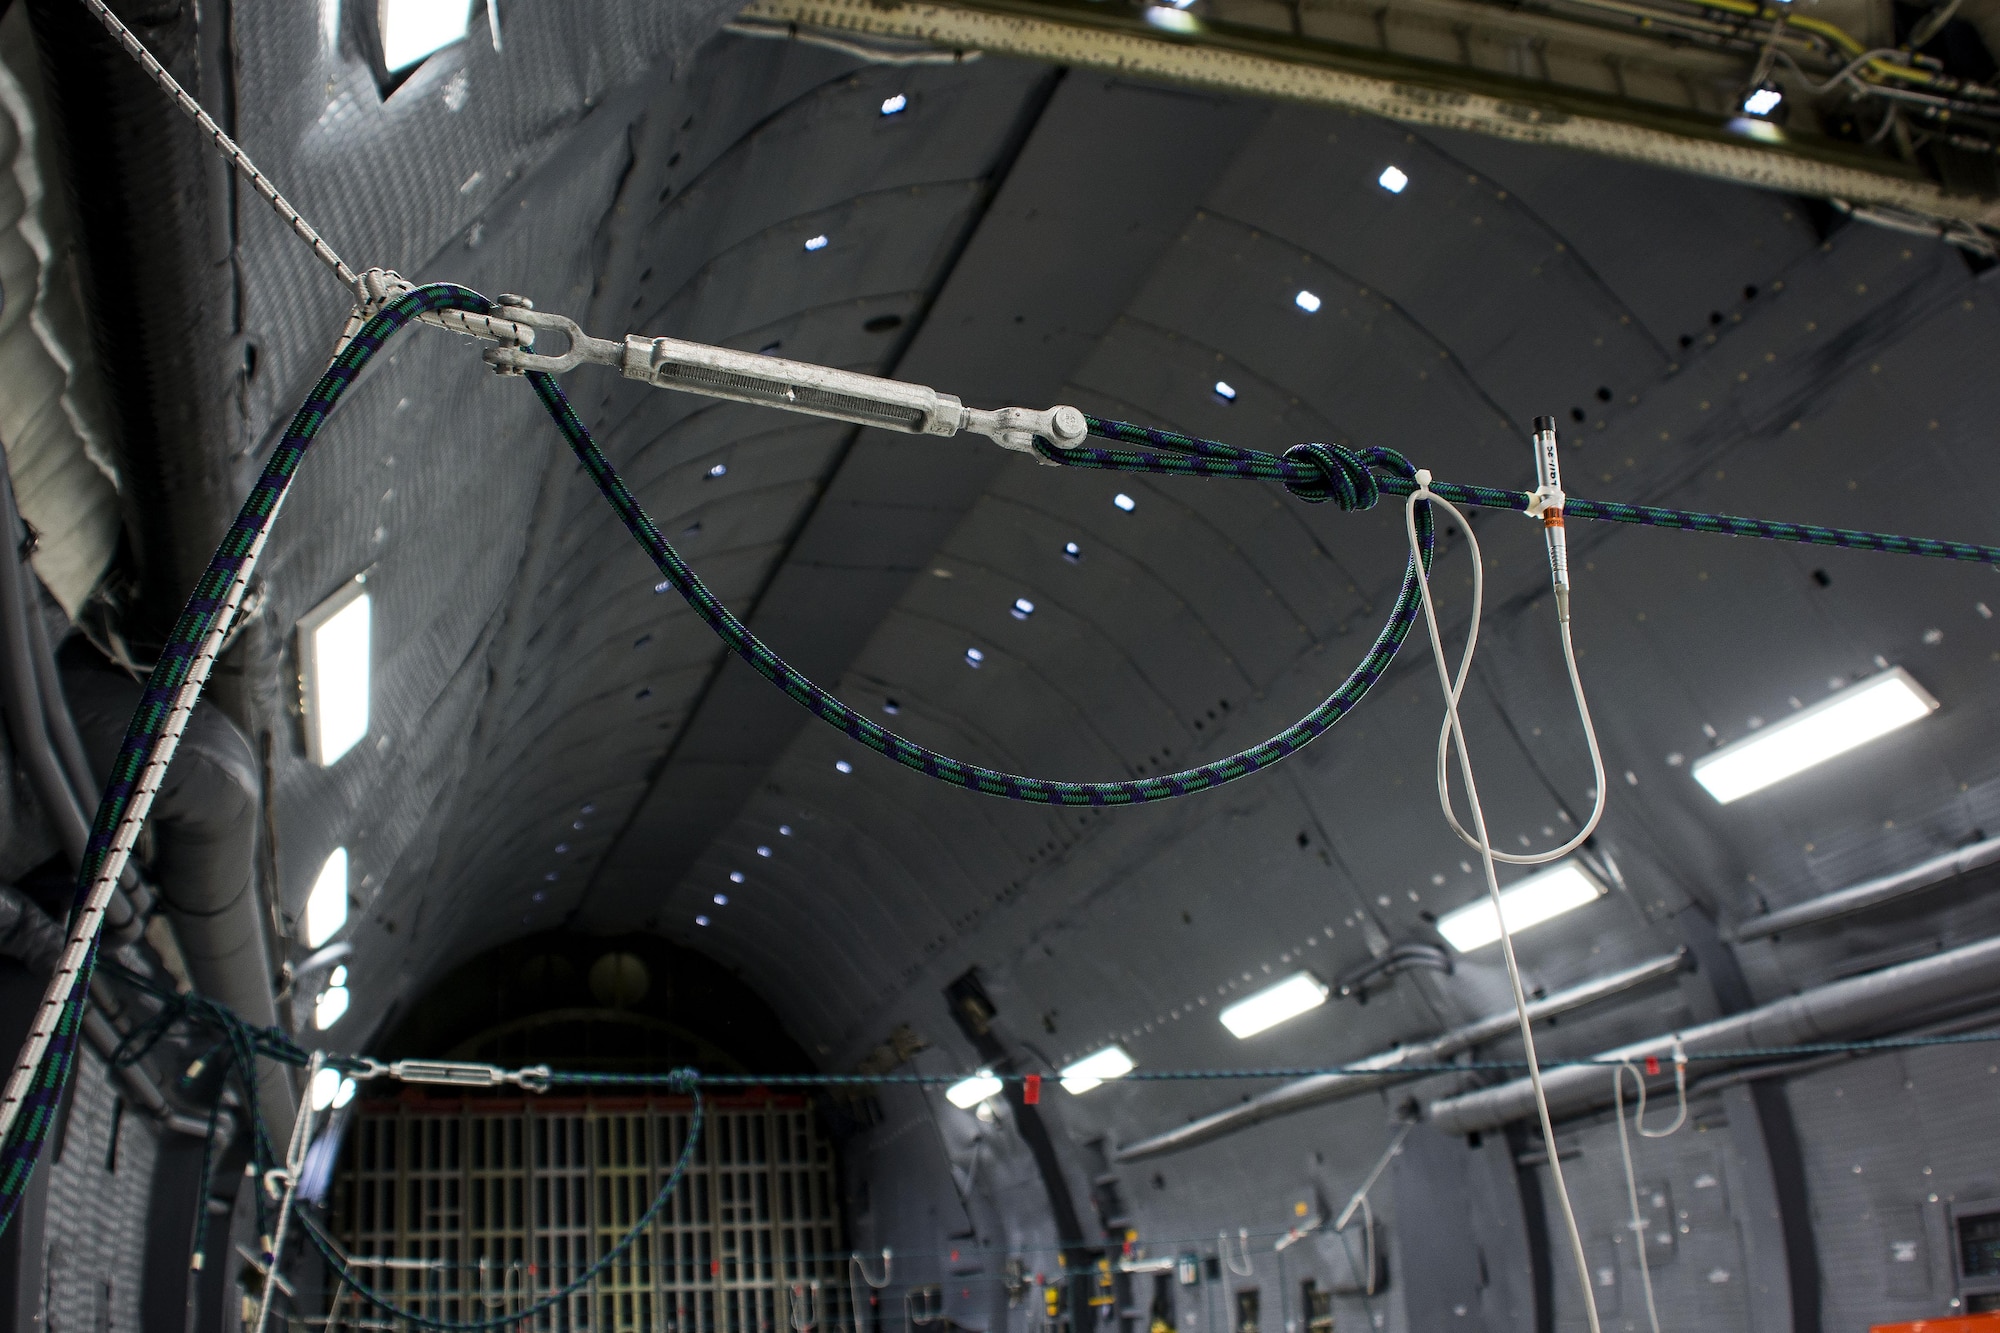 Twelve microphones, five single-axis accelerometers and four triaxle accelerometers were mounted in the cargo compartment of a C-5M Super Galaxy to collect interior noise and vibration data during a flight Sept. 24, 2015, at Travis Air Force Base, Calif. (U.S. Air Force photo/Senior Airman Charles Rivezzo)